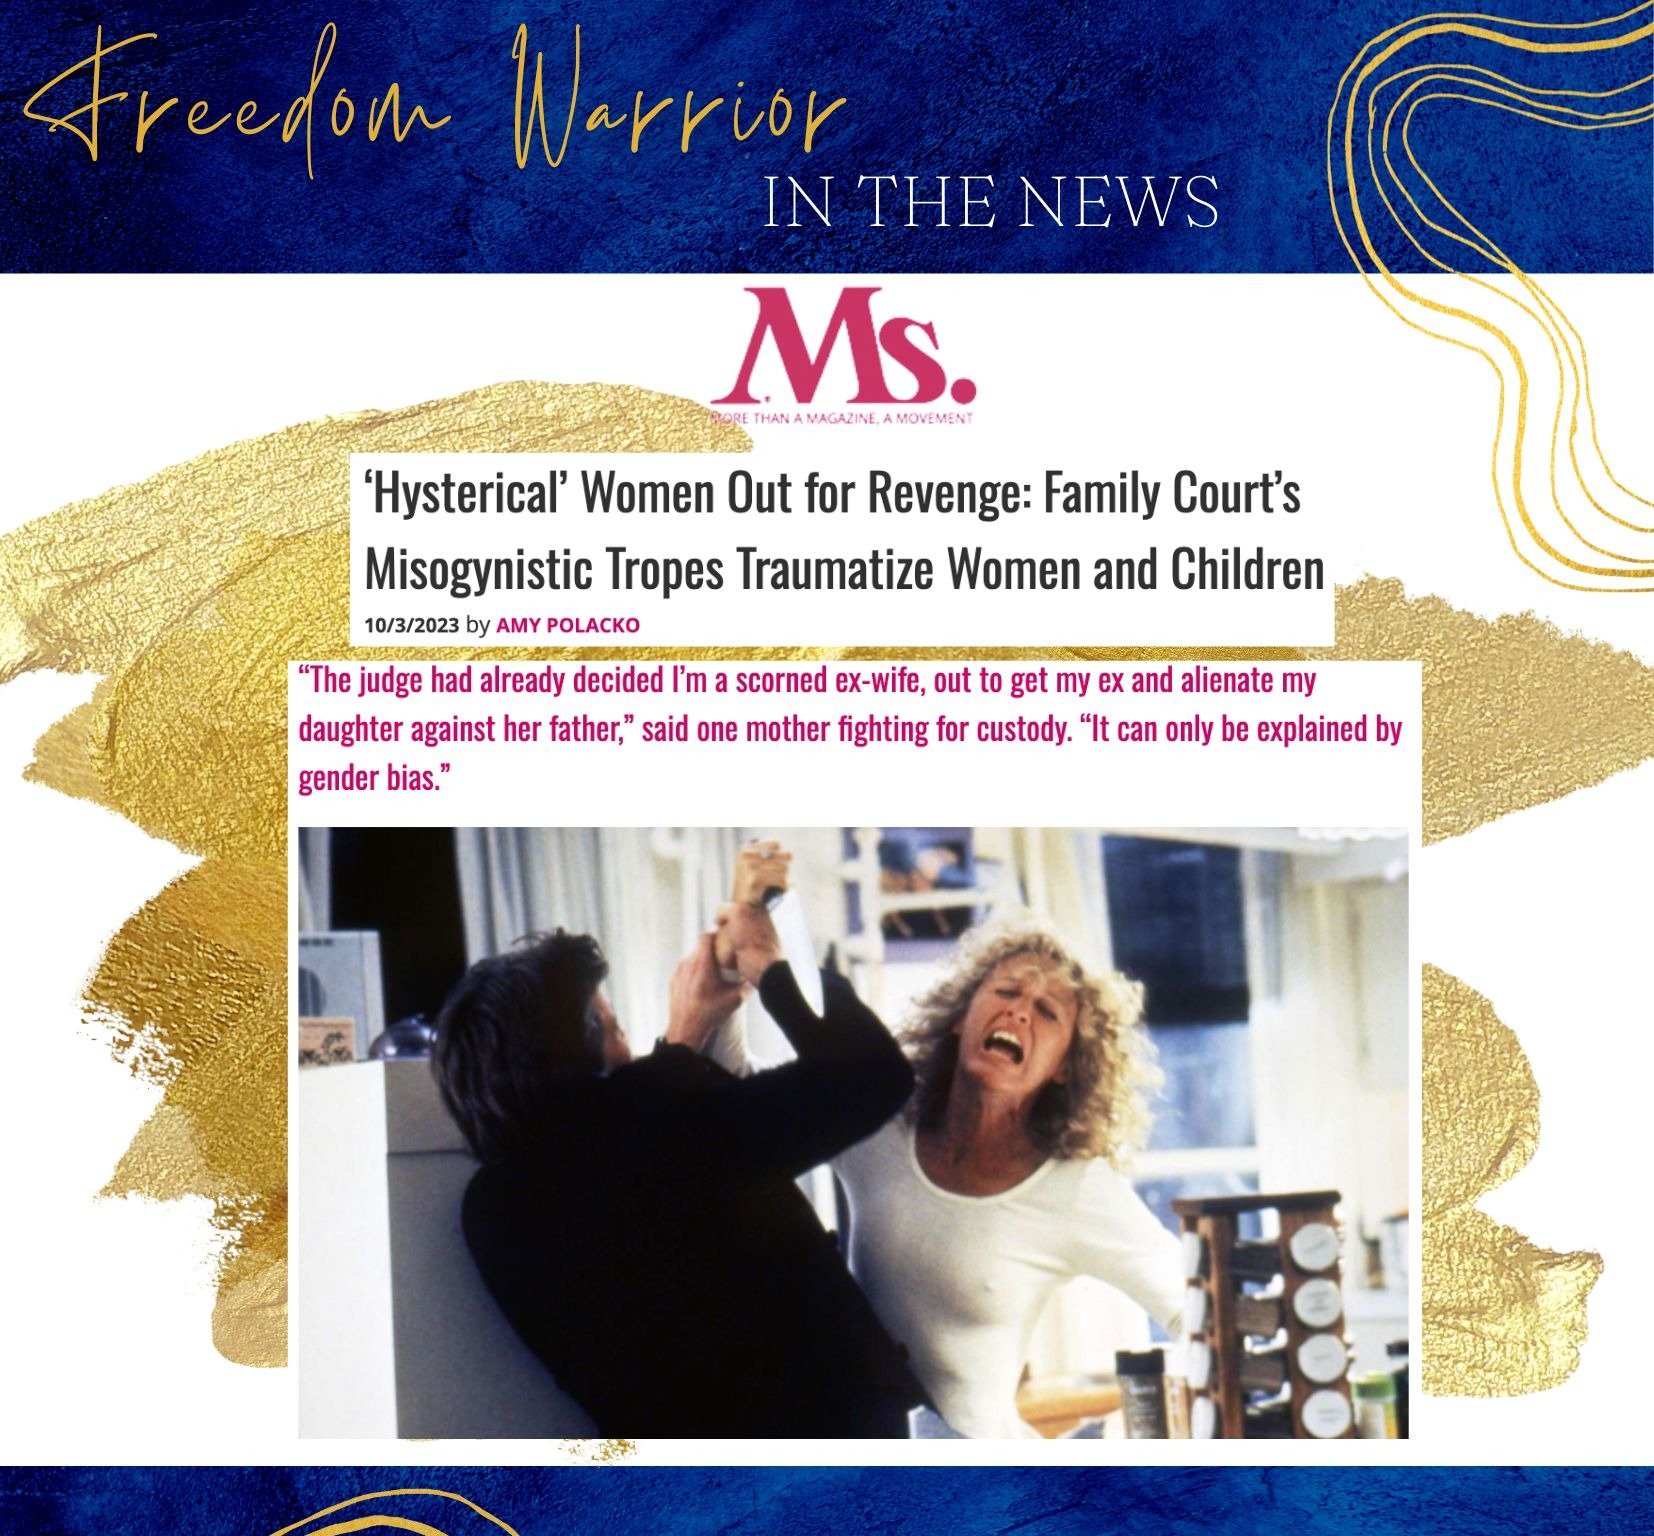 ‘Hysterical’ Women Out for Revenge: Family Court’s Misogynistic Tropes Traumatize Women and Children